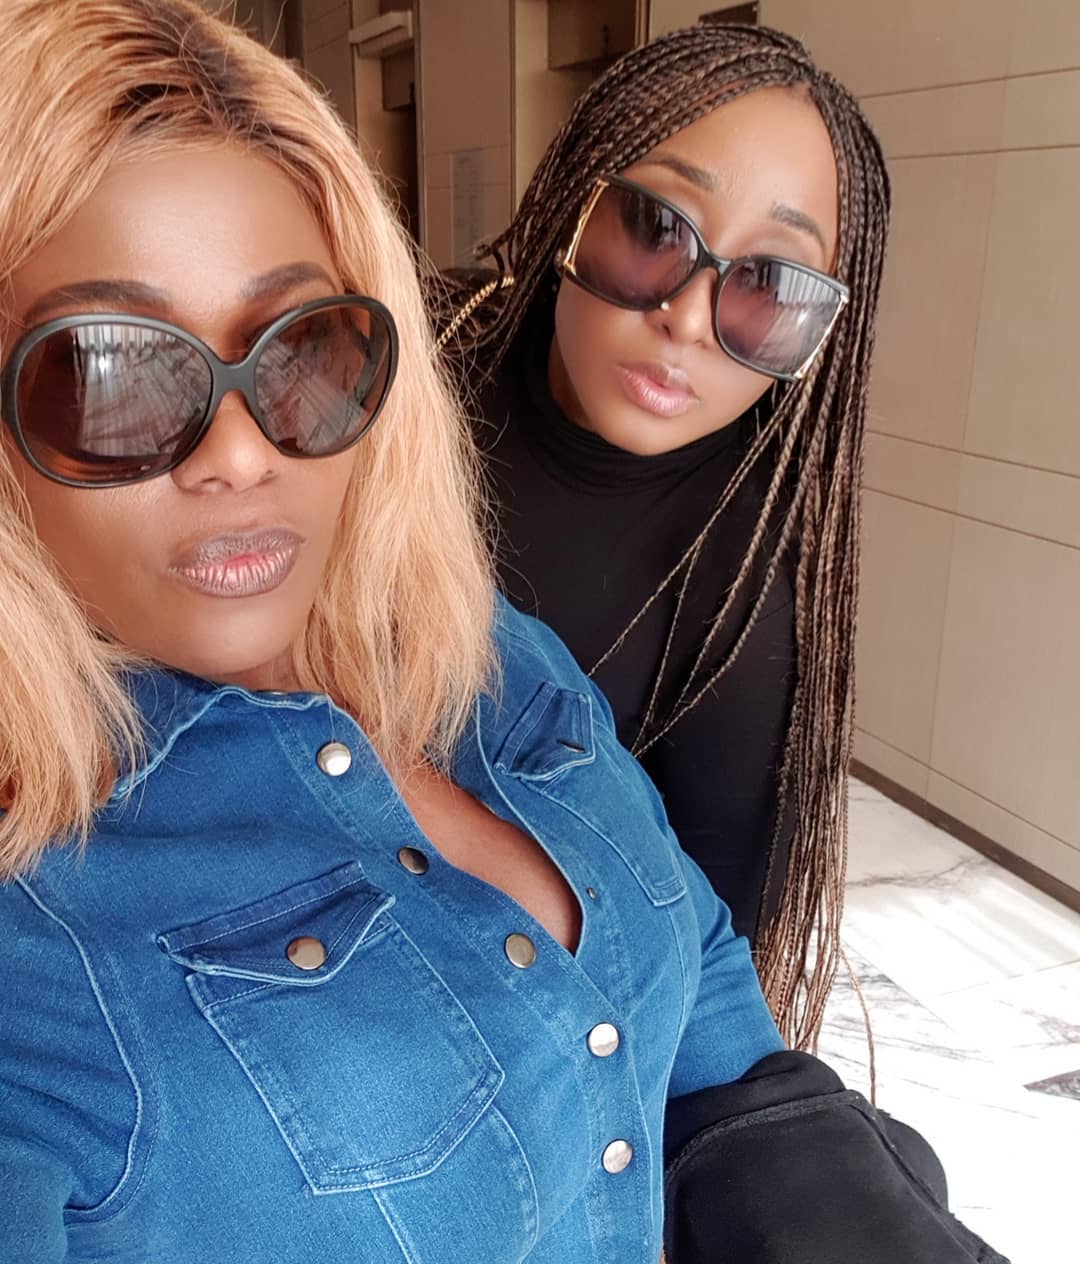 "Why Uche Jombo hated me at first" - Ini Edo reveals